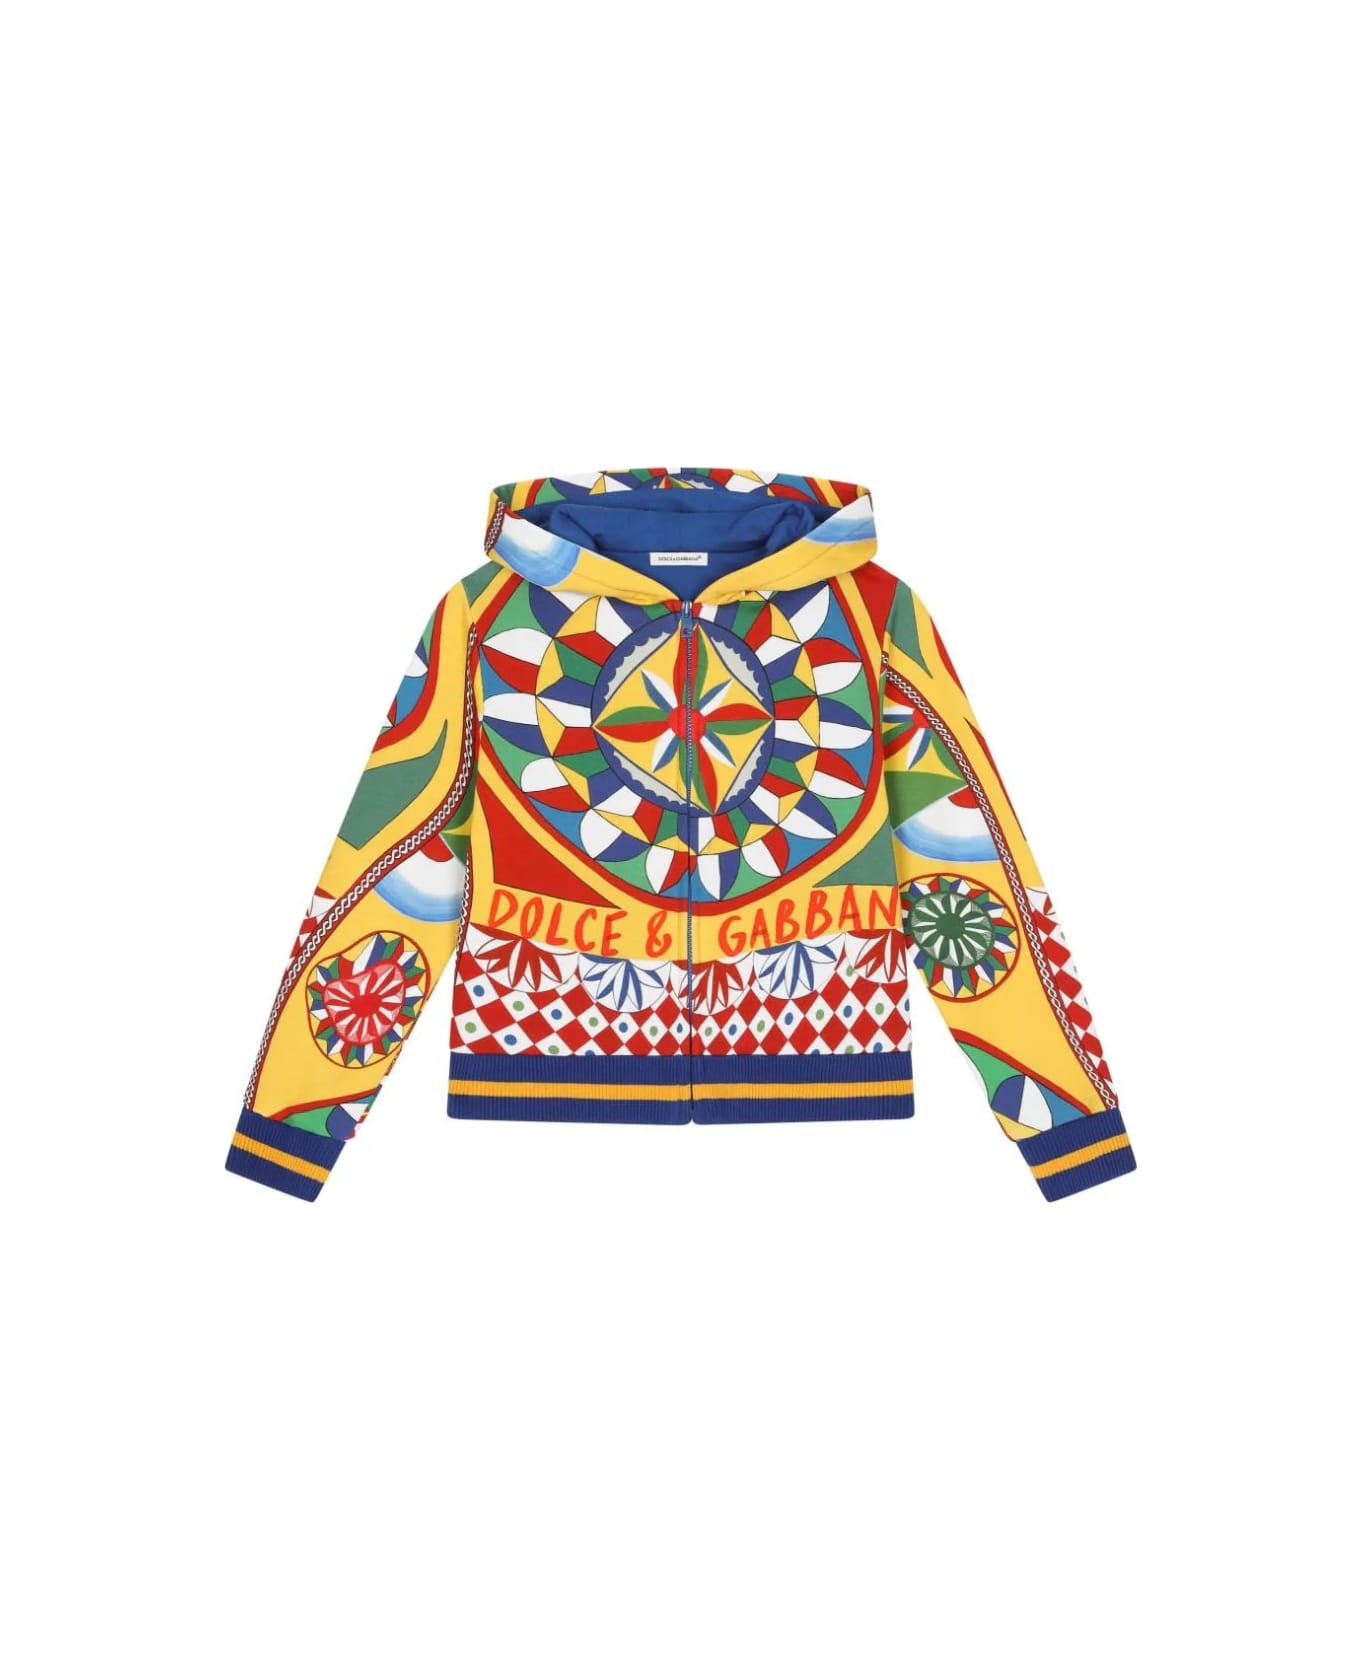 Dolce & Gabbana Zipped Hoodie With Cart Print - Multicolour